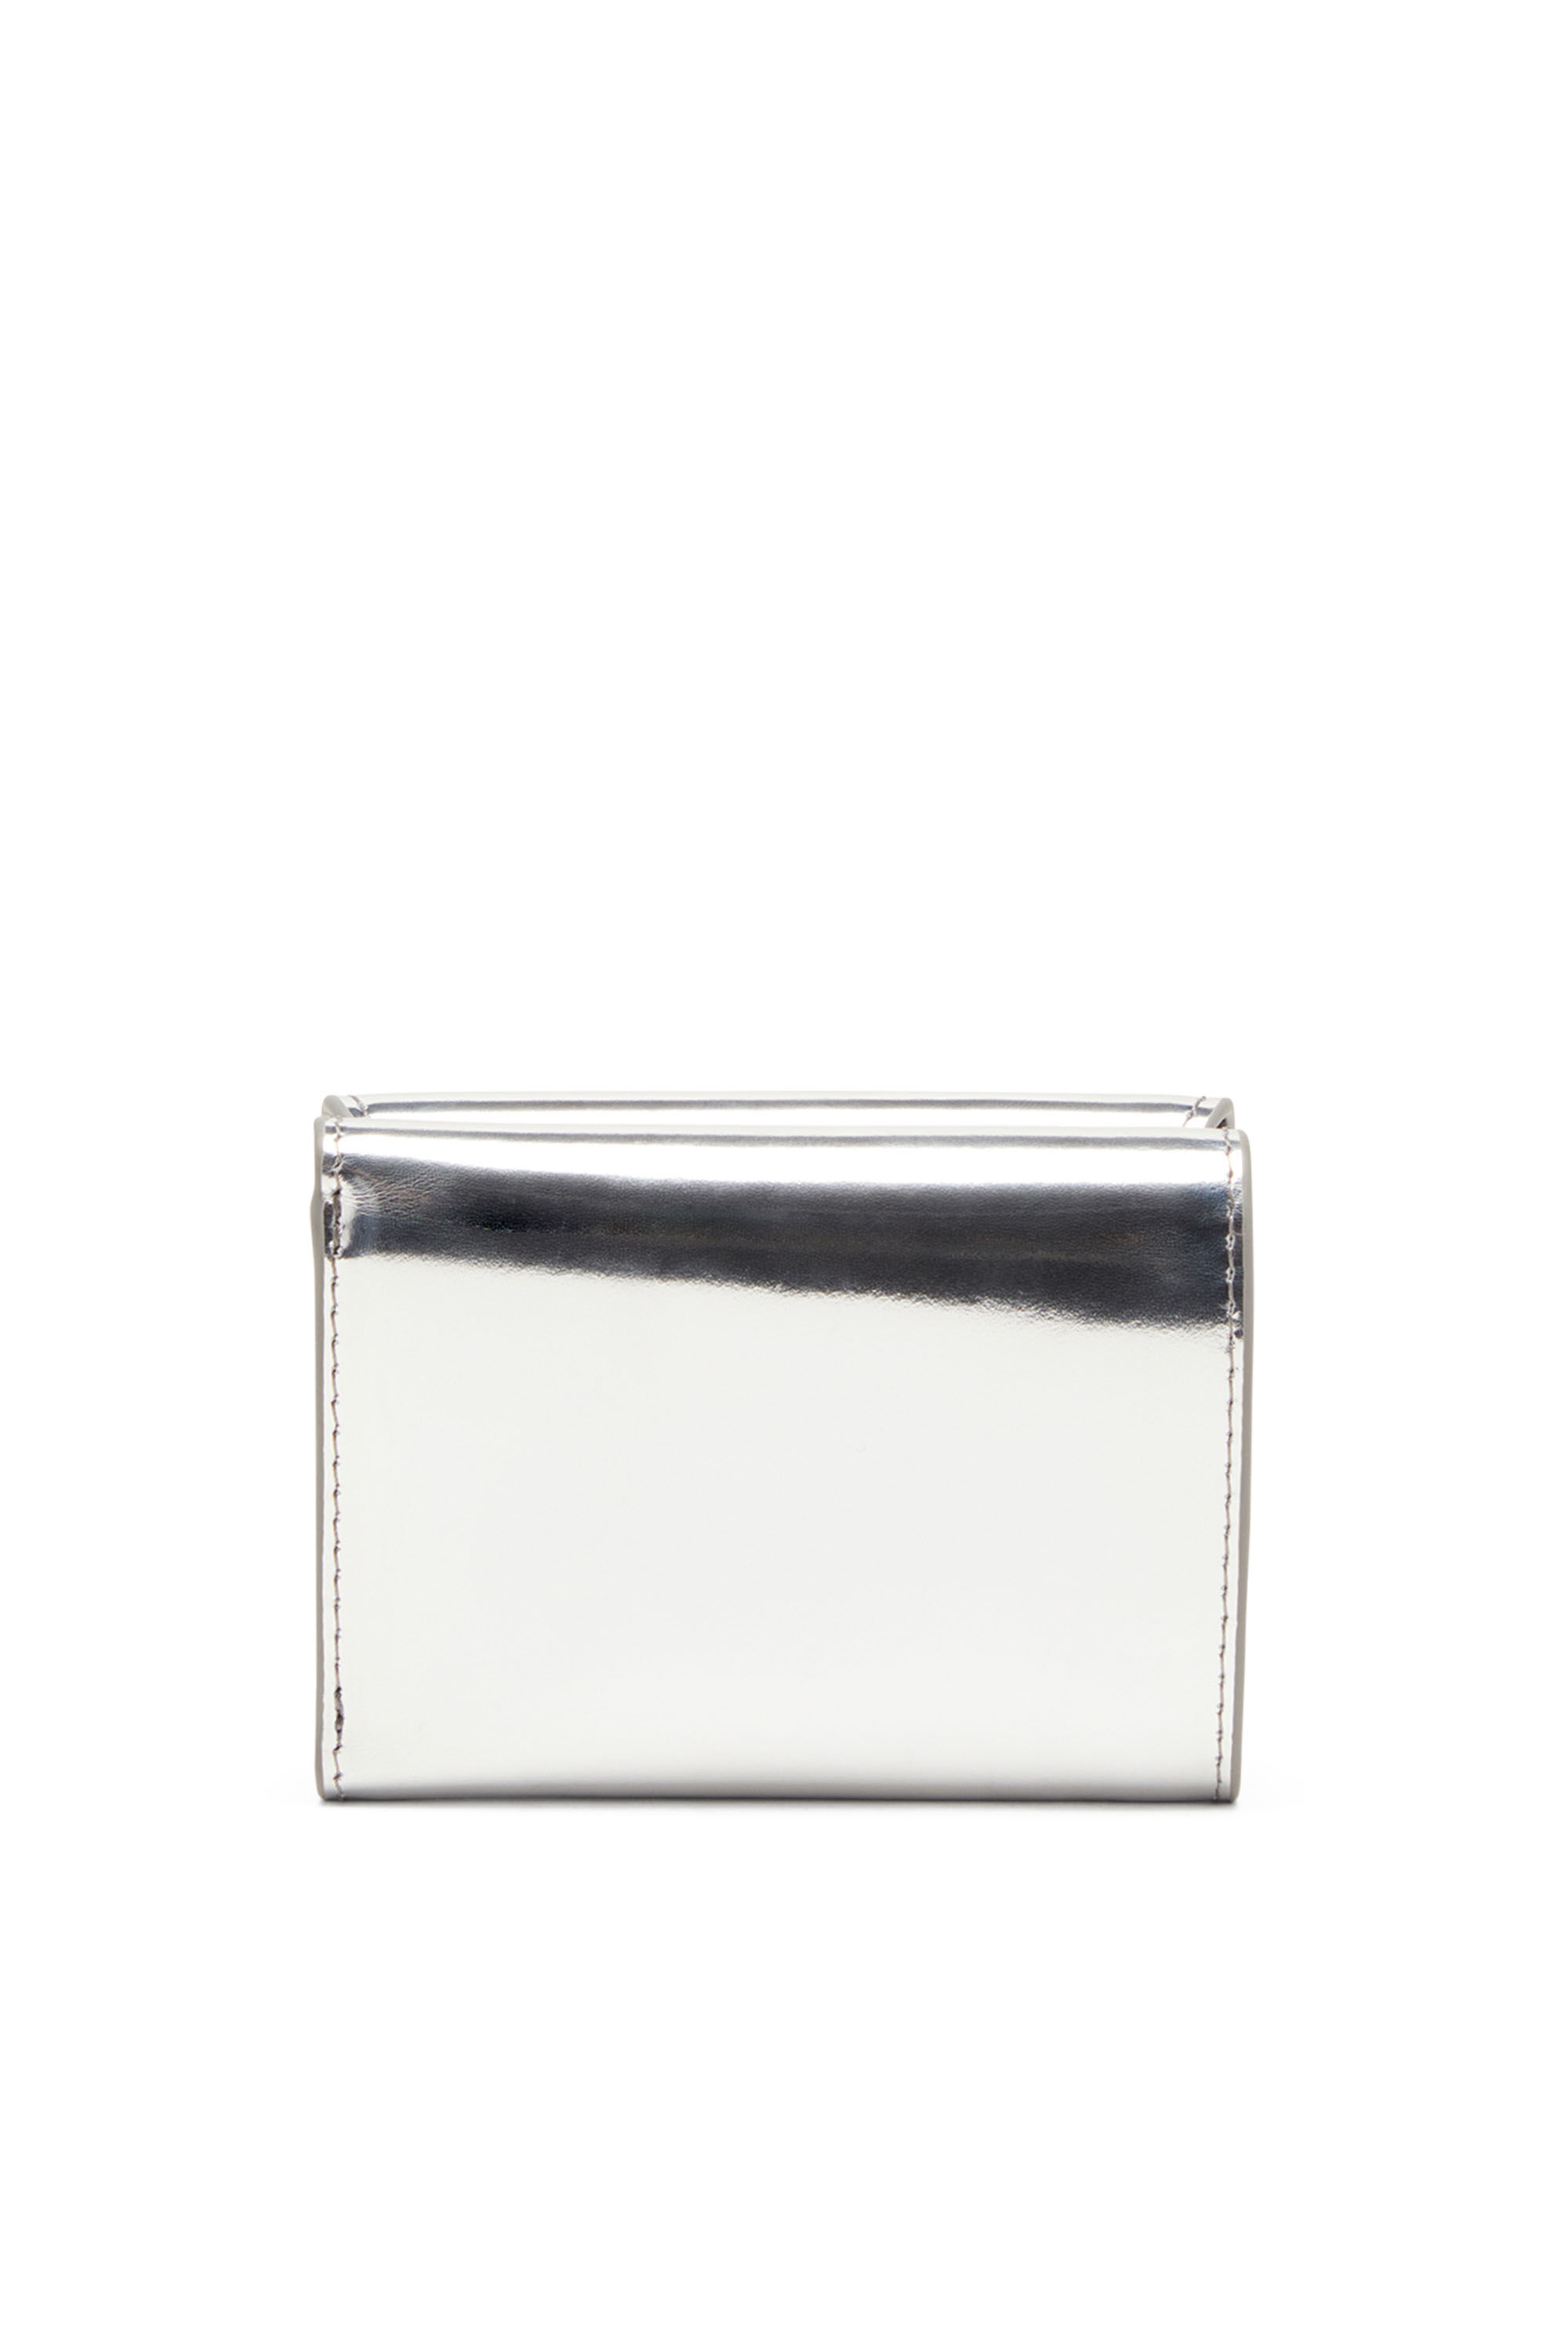 Diesel - 1DR TRI FOLD COIN XS II, Female Tri-fold wallet in mirrored leather in シルバー - Image 2